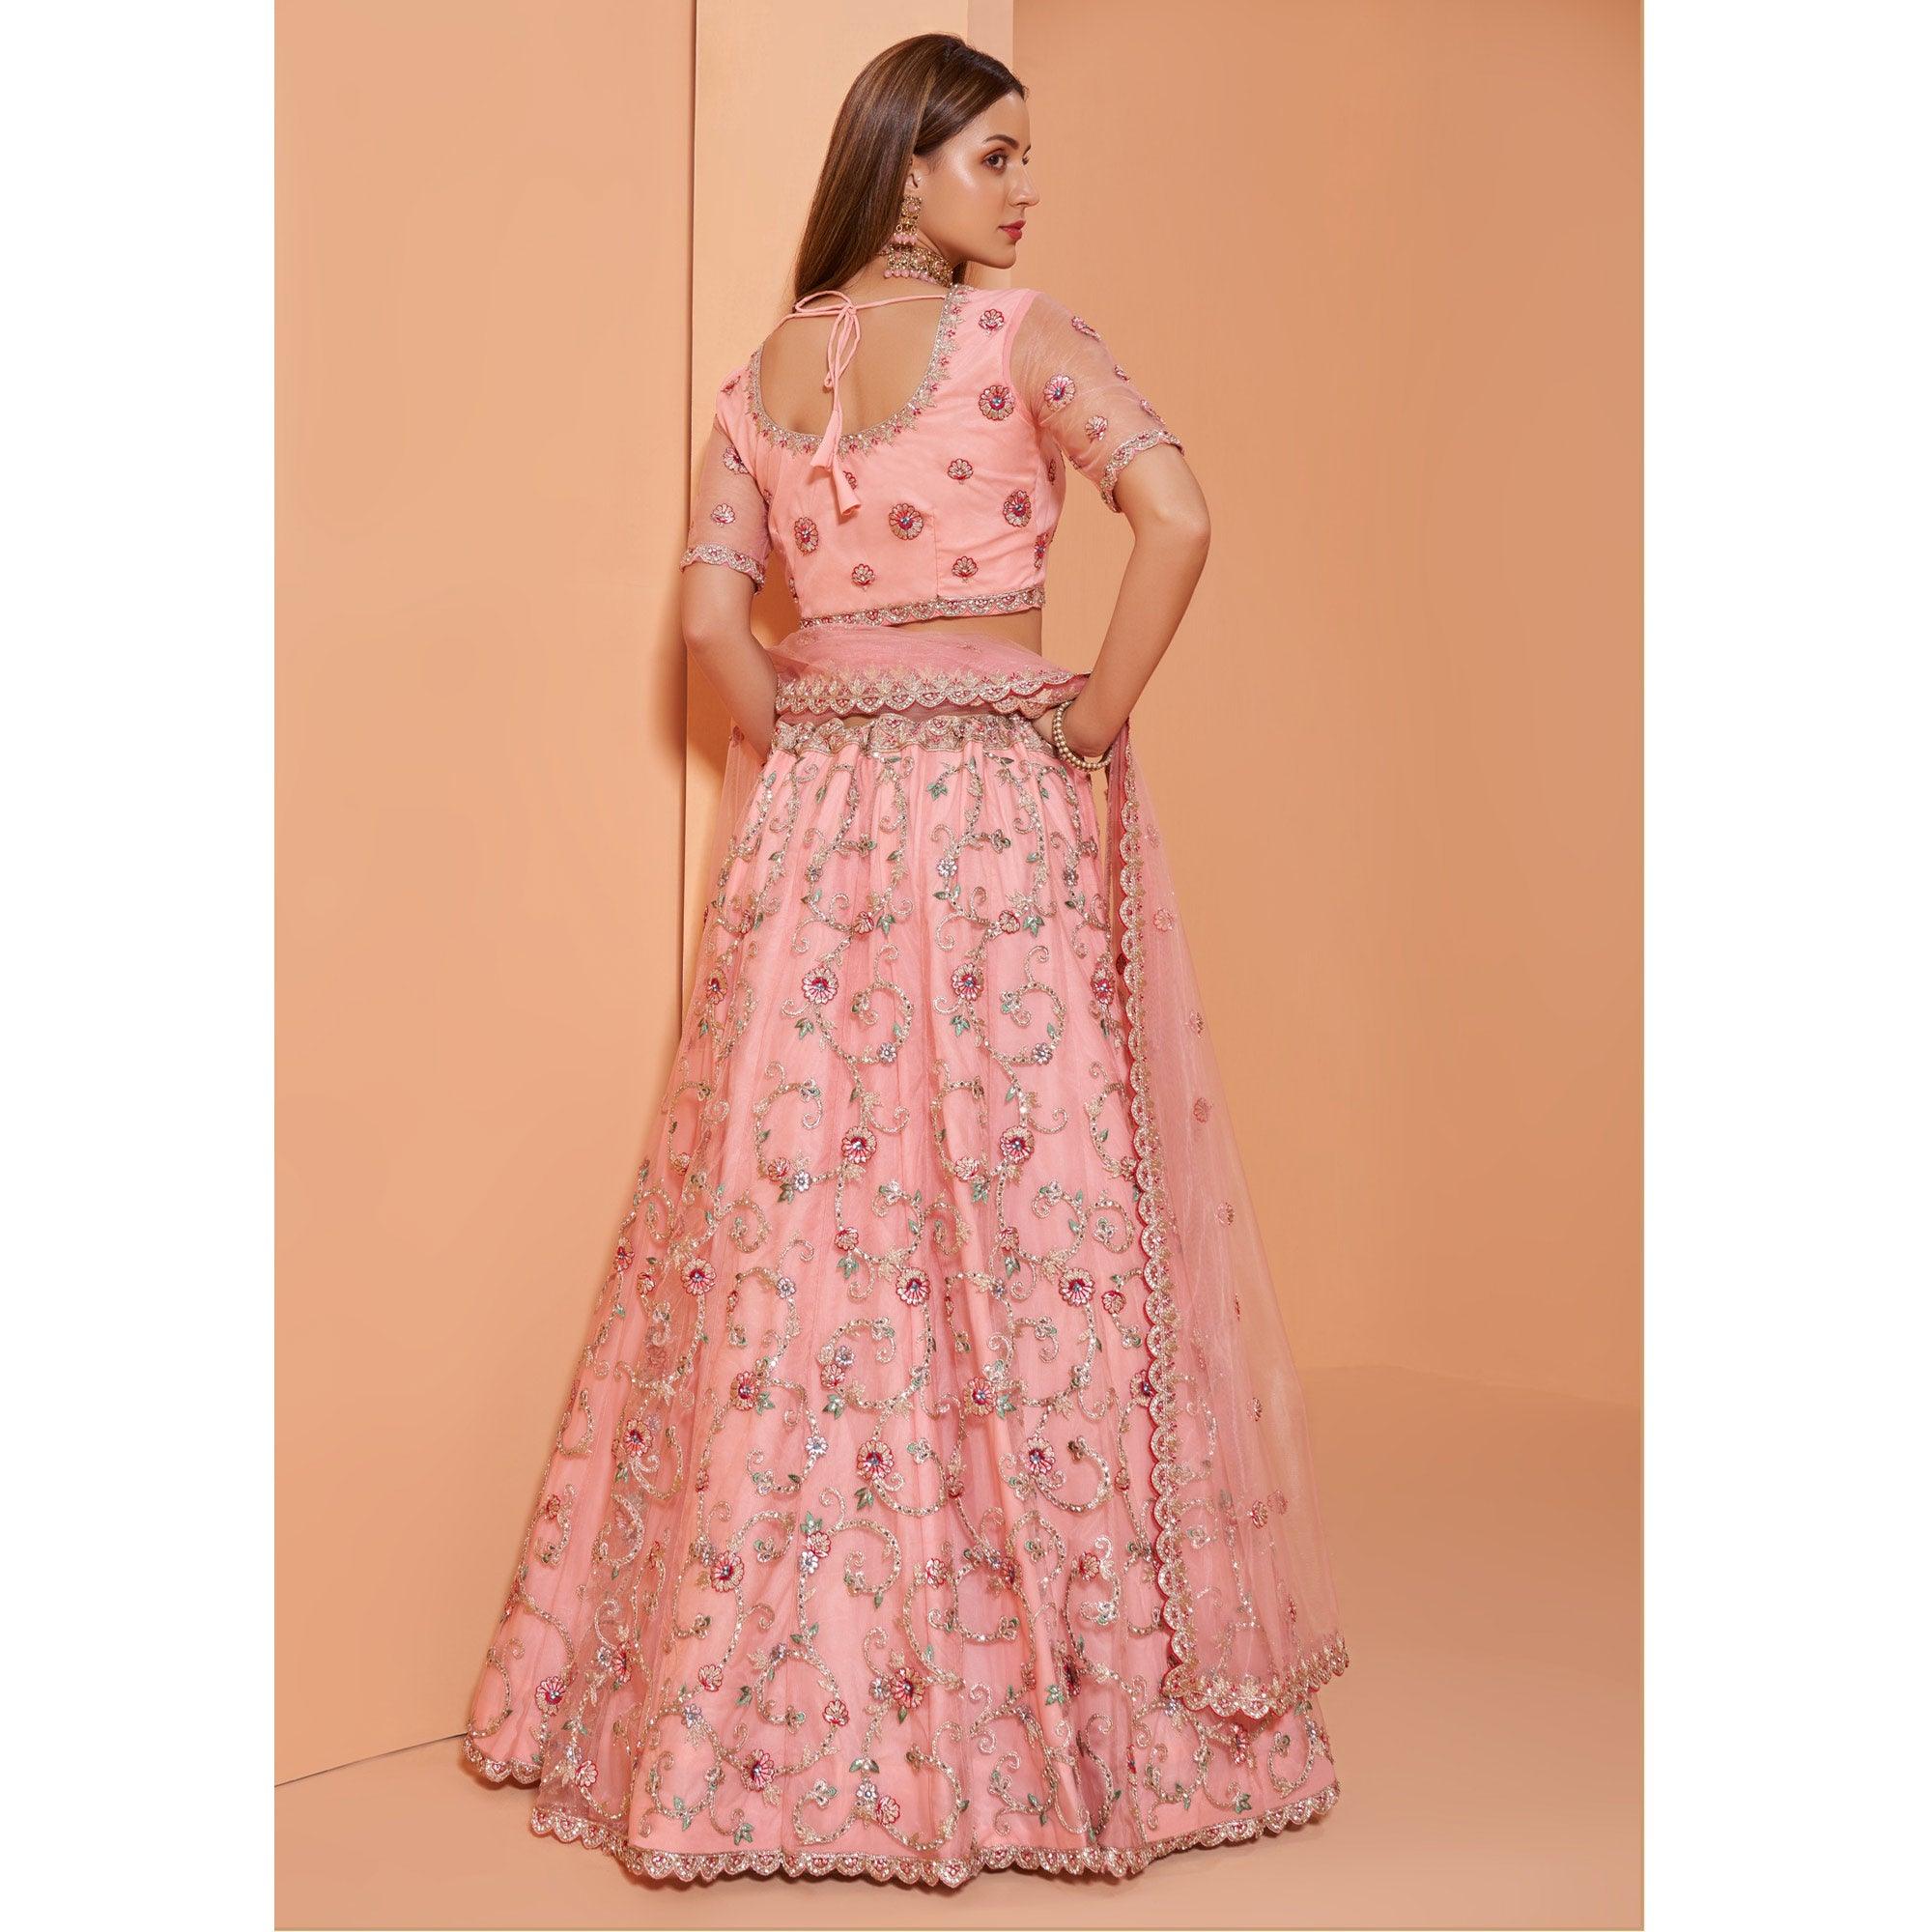 Pink Partywear Floral Embroidered With Embellished Net Lehenga Choli - Peachmode